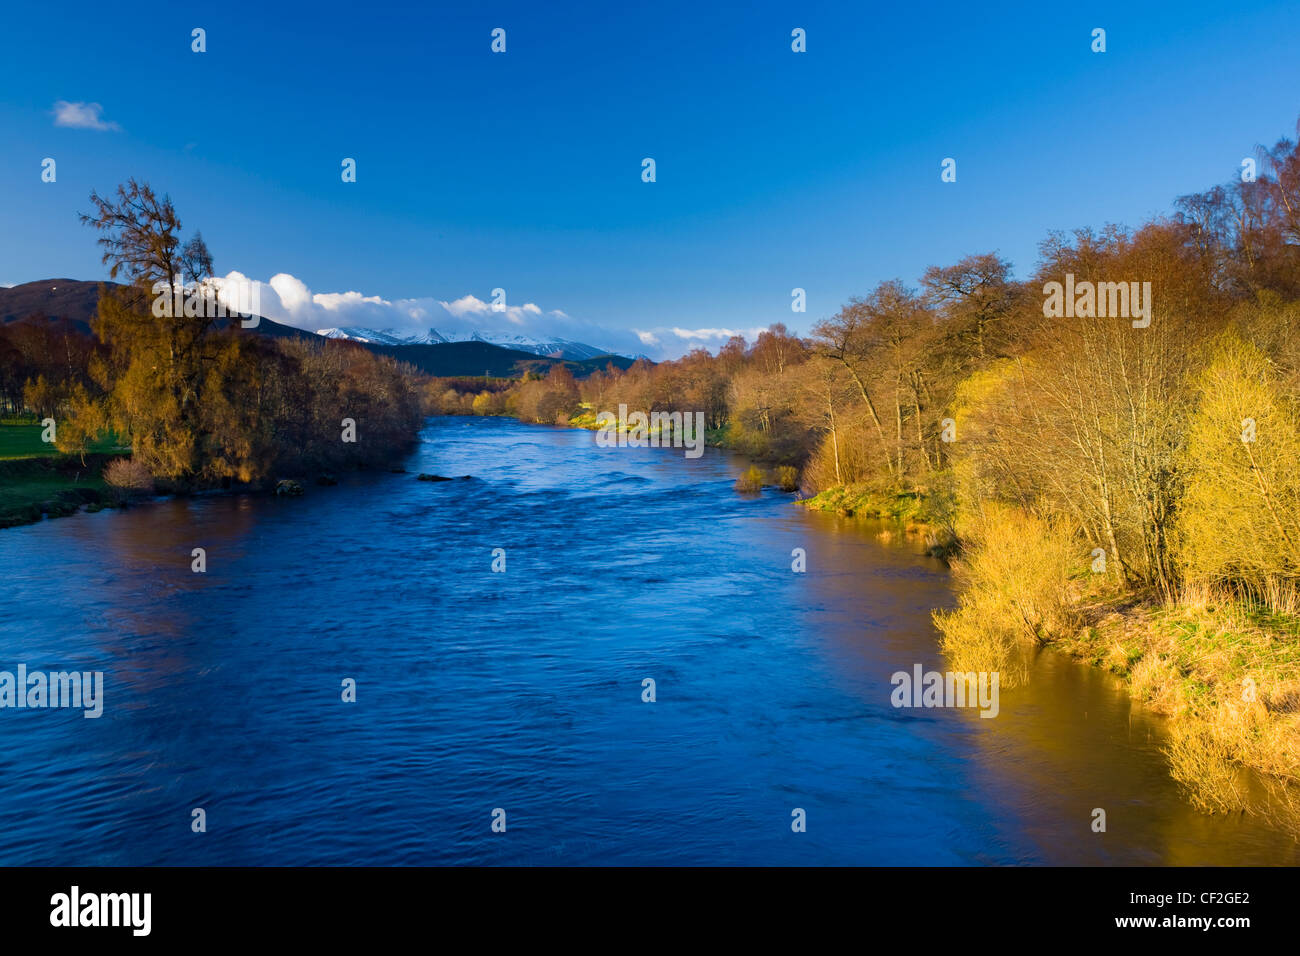 The River Spey near the village of Boat of Garten in the Cairngorms National Park. Stock Photo